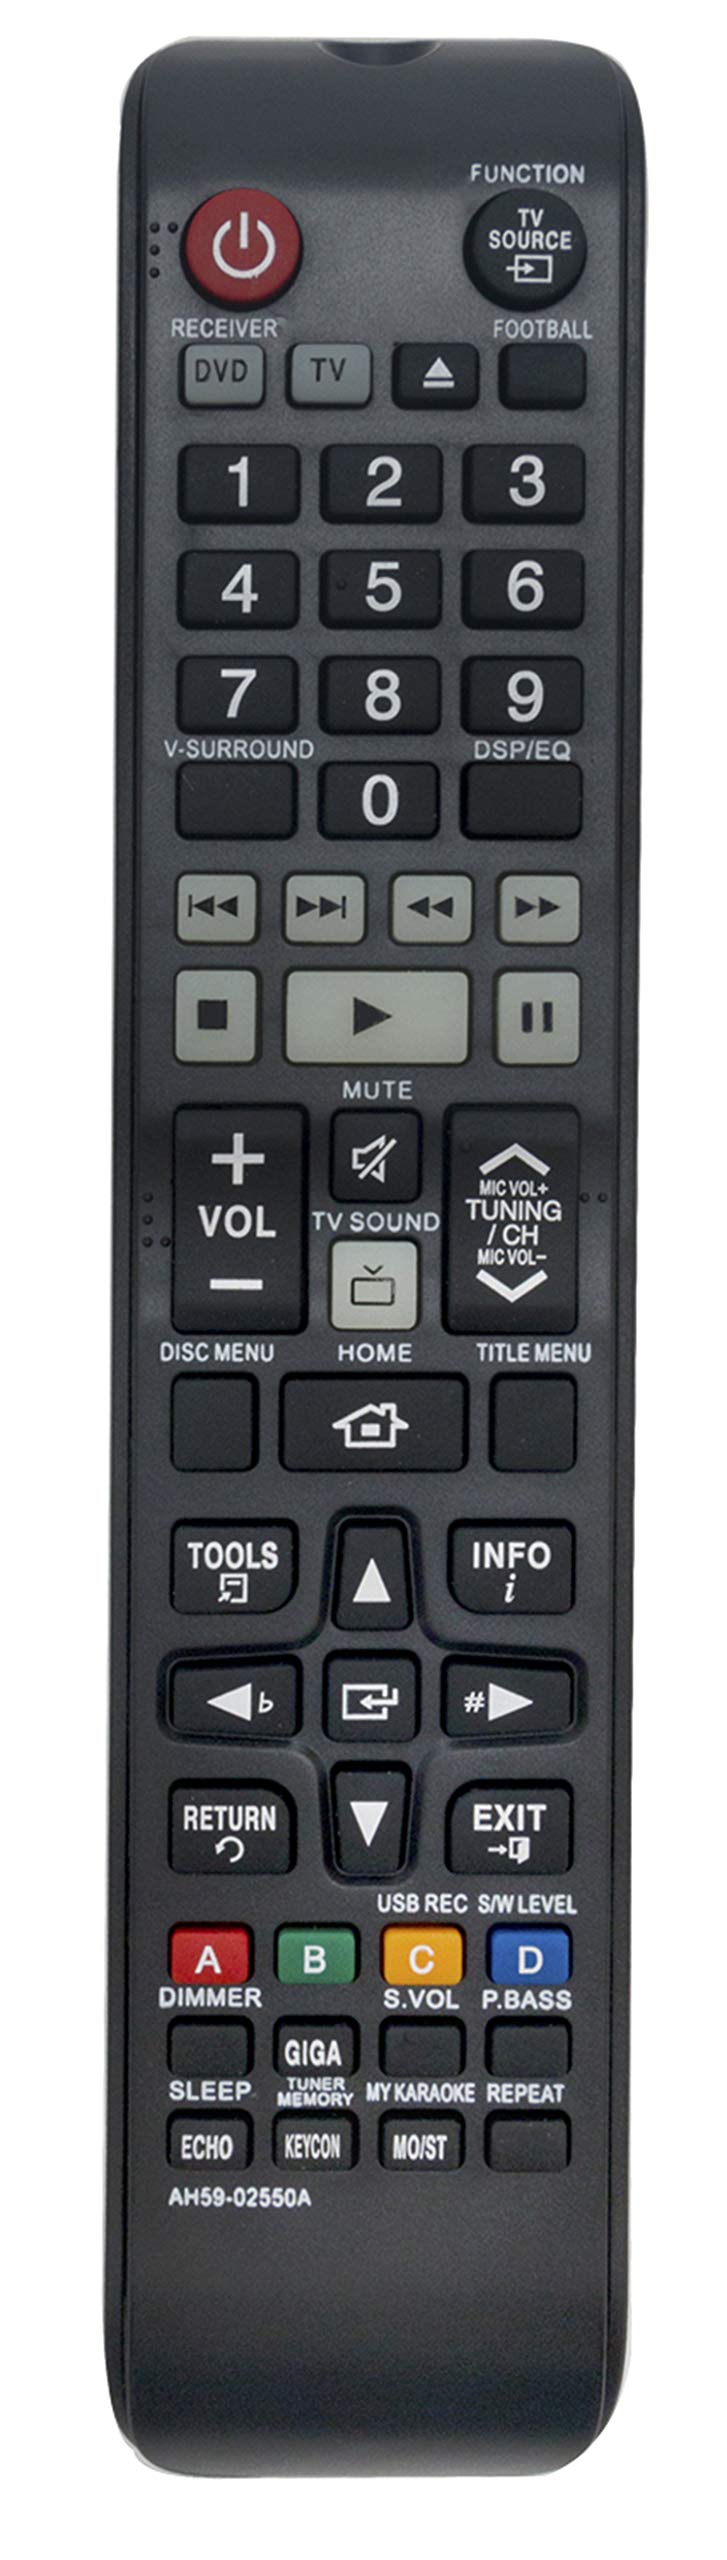 New AH59-02550A Replace Remote Fit for Samsung HT-F453K HT-F453HK HT-F445K HT-F455K HT-F450BK HT-F453RK HT-F450RK HT-F453HBK HT-F453HRK HT-F455BK HT-F455RK HT-F453BK Digital Home Entertainment System